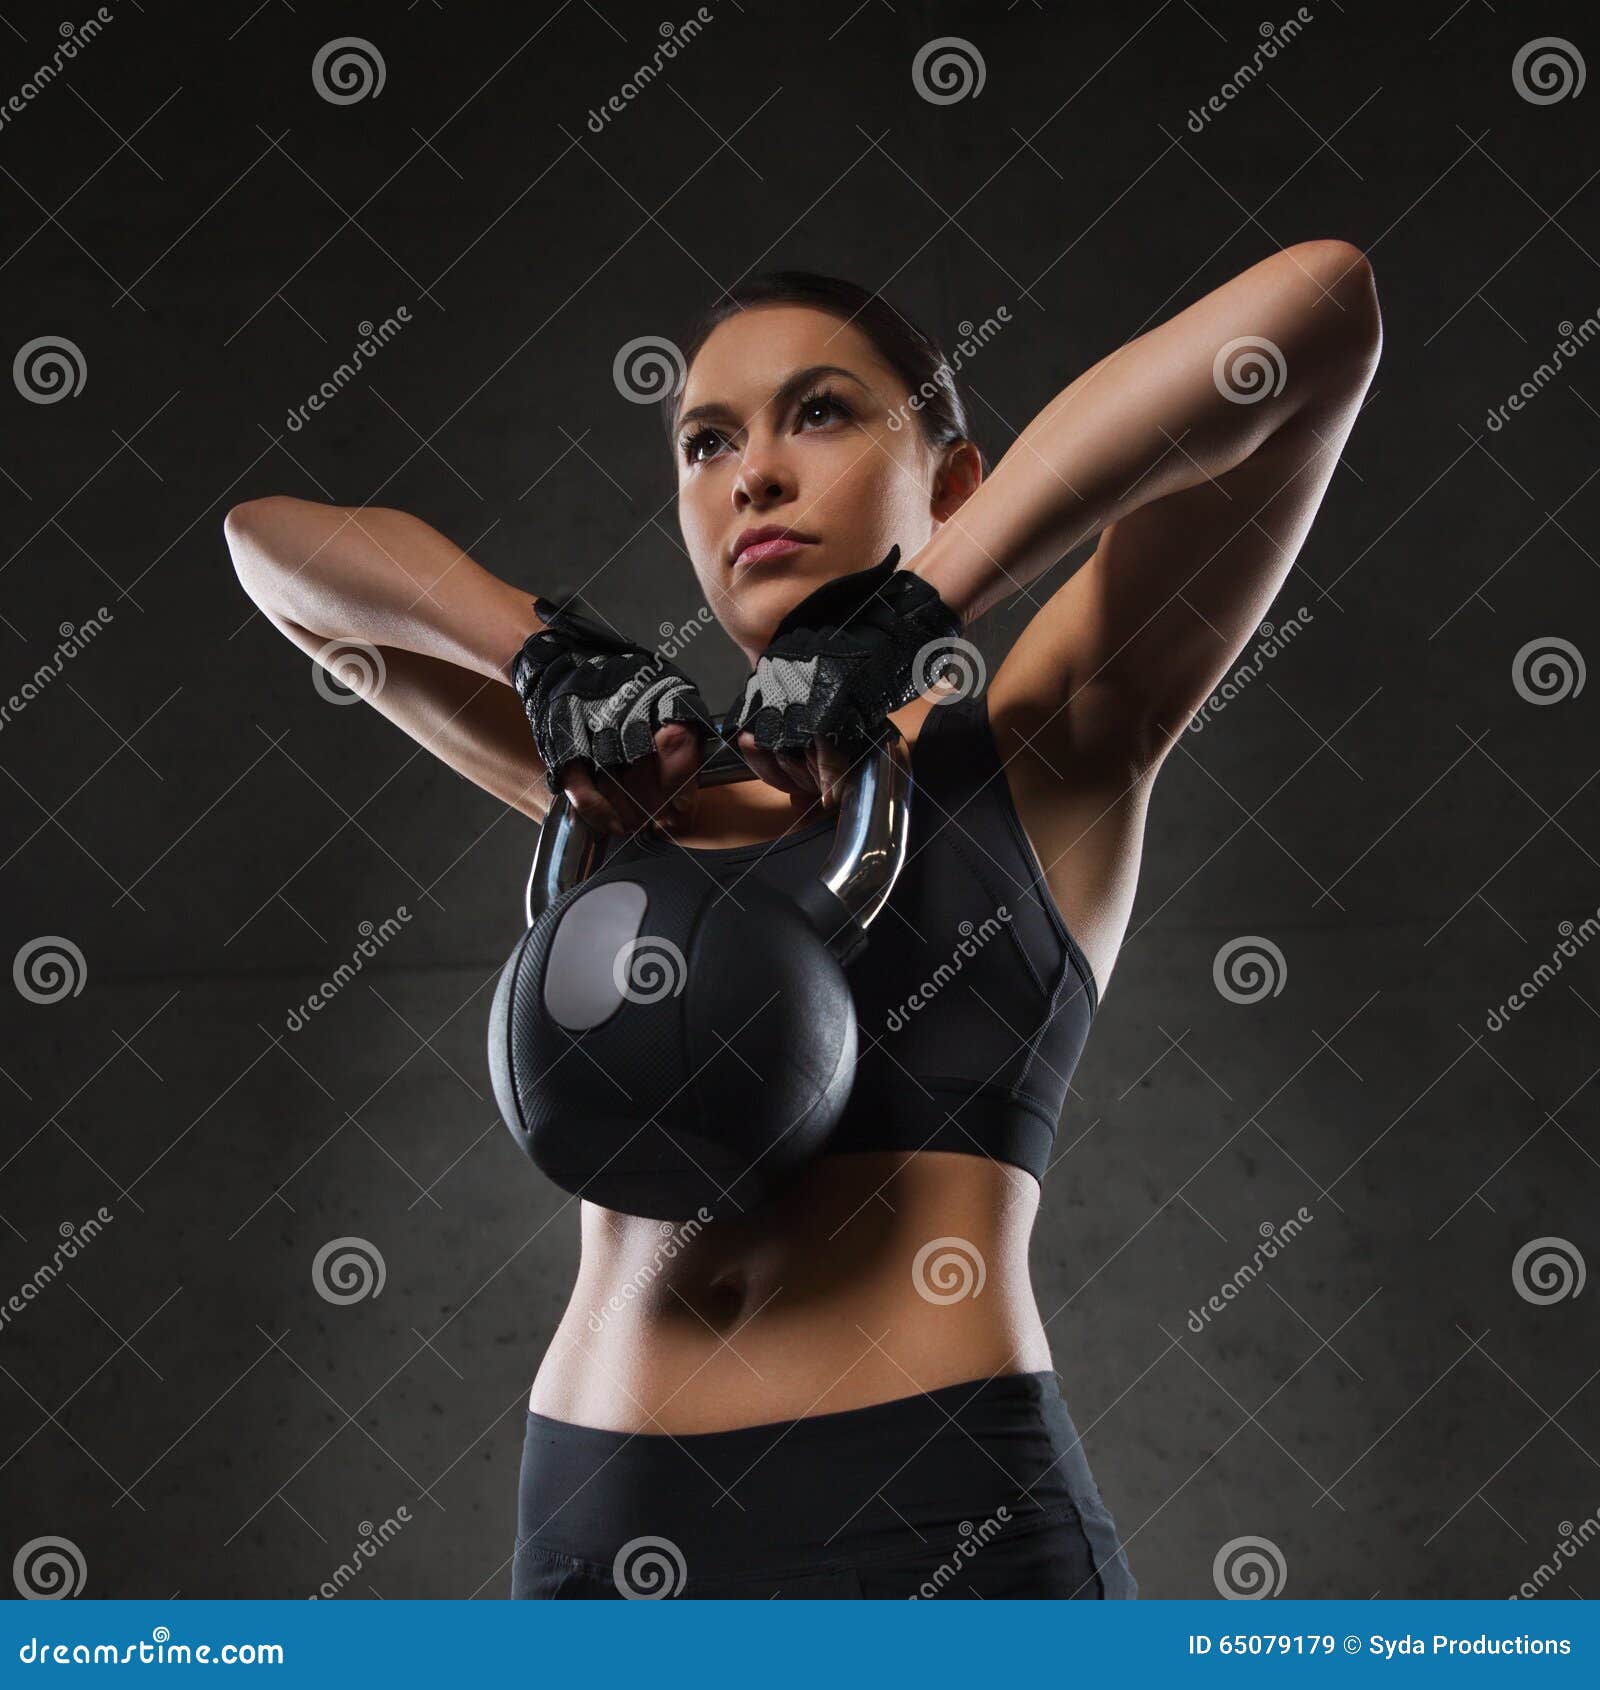 Fitness woman flexing muscles stock photo (126120) - YouWorkForThem